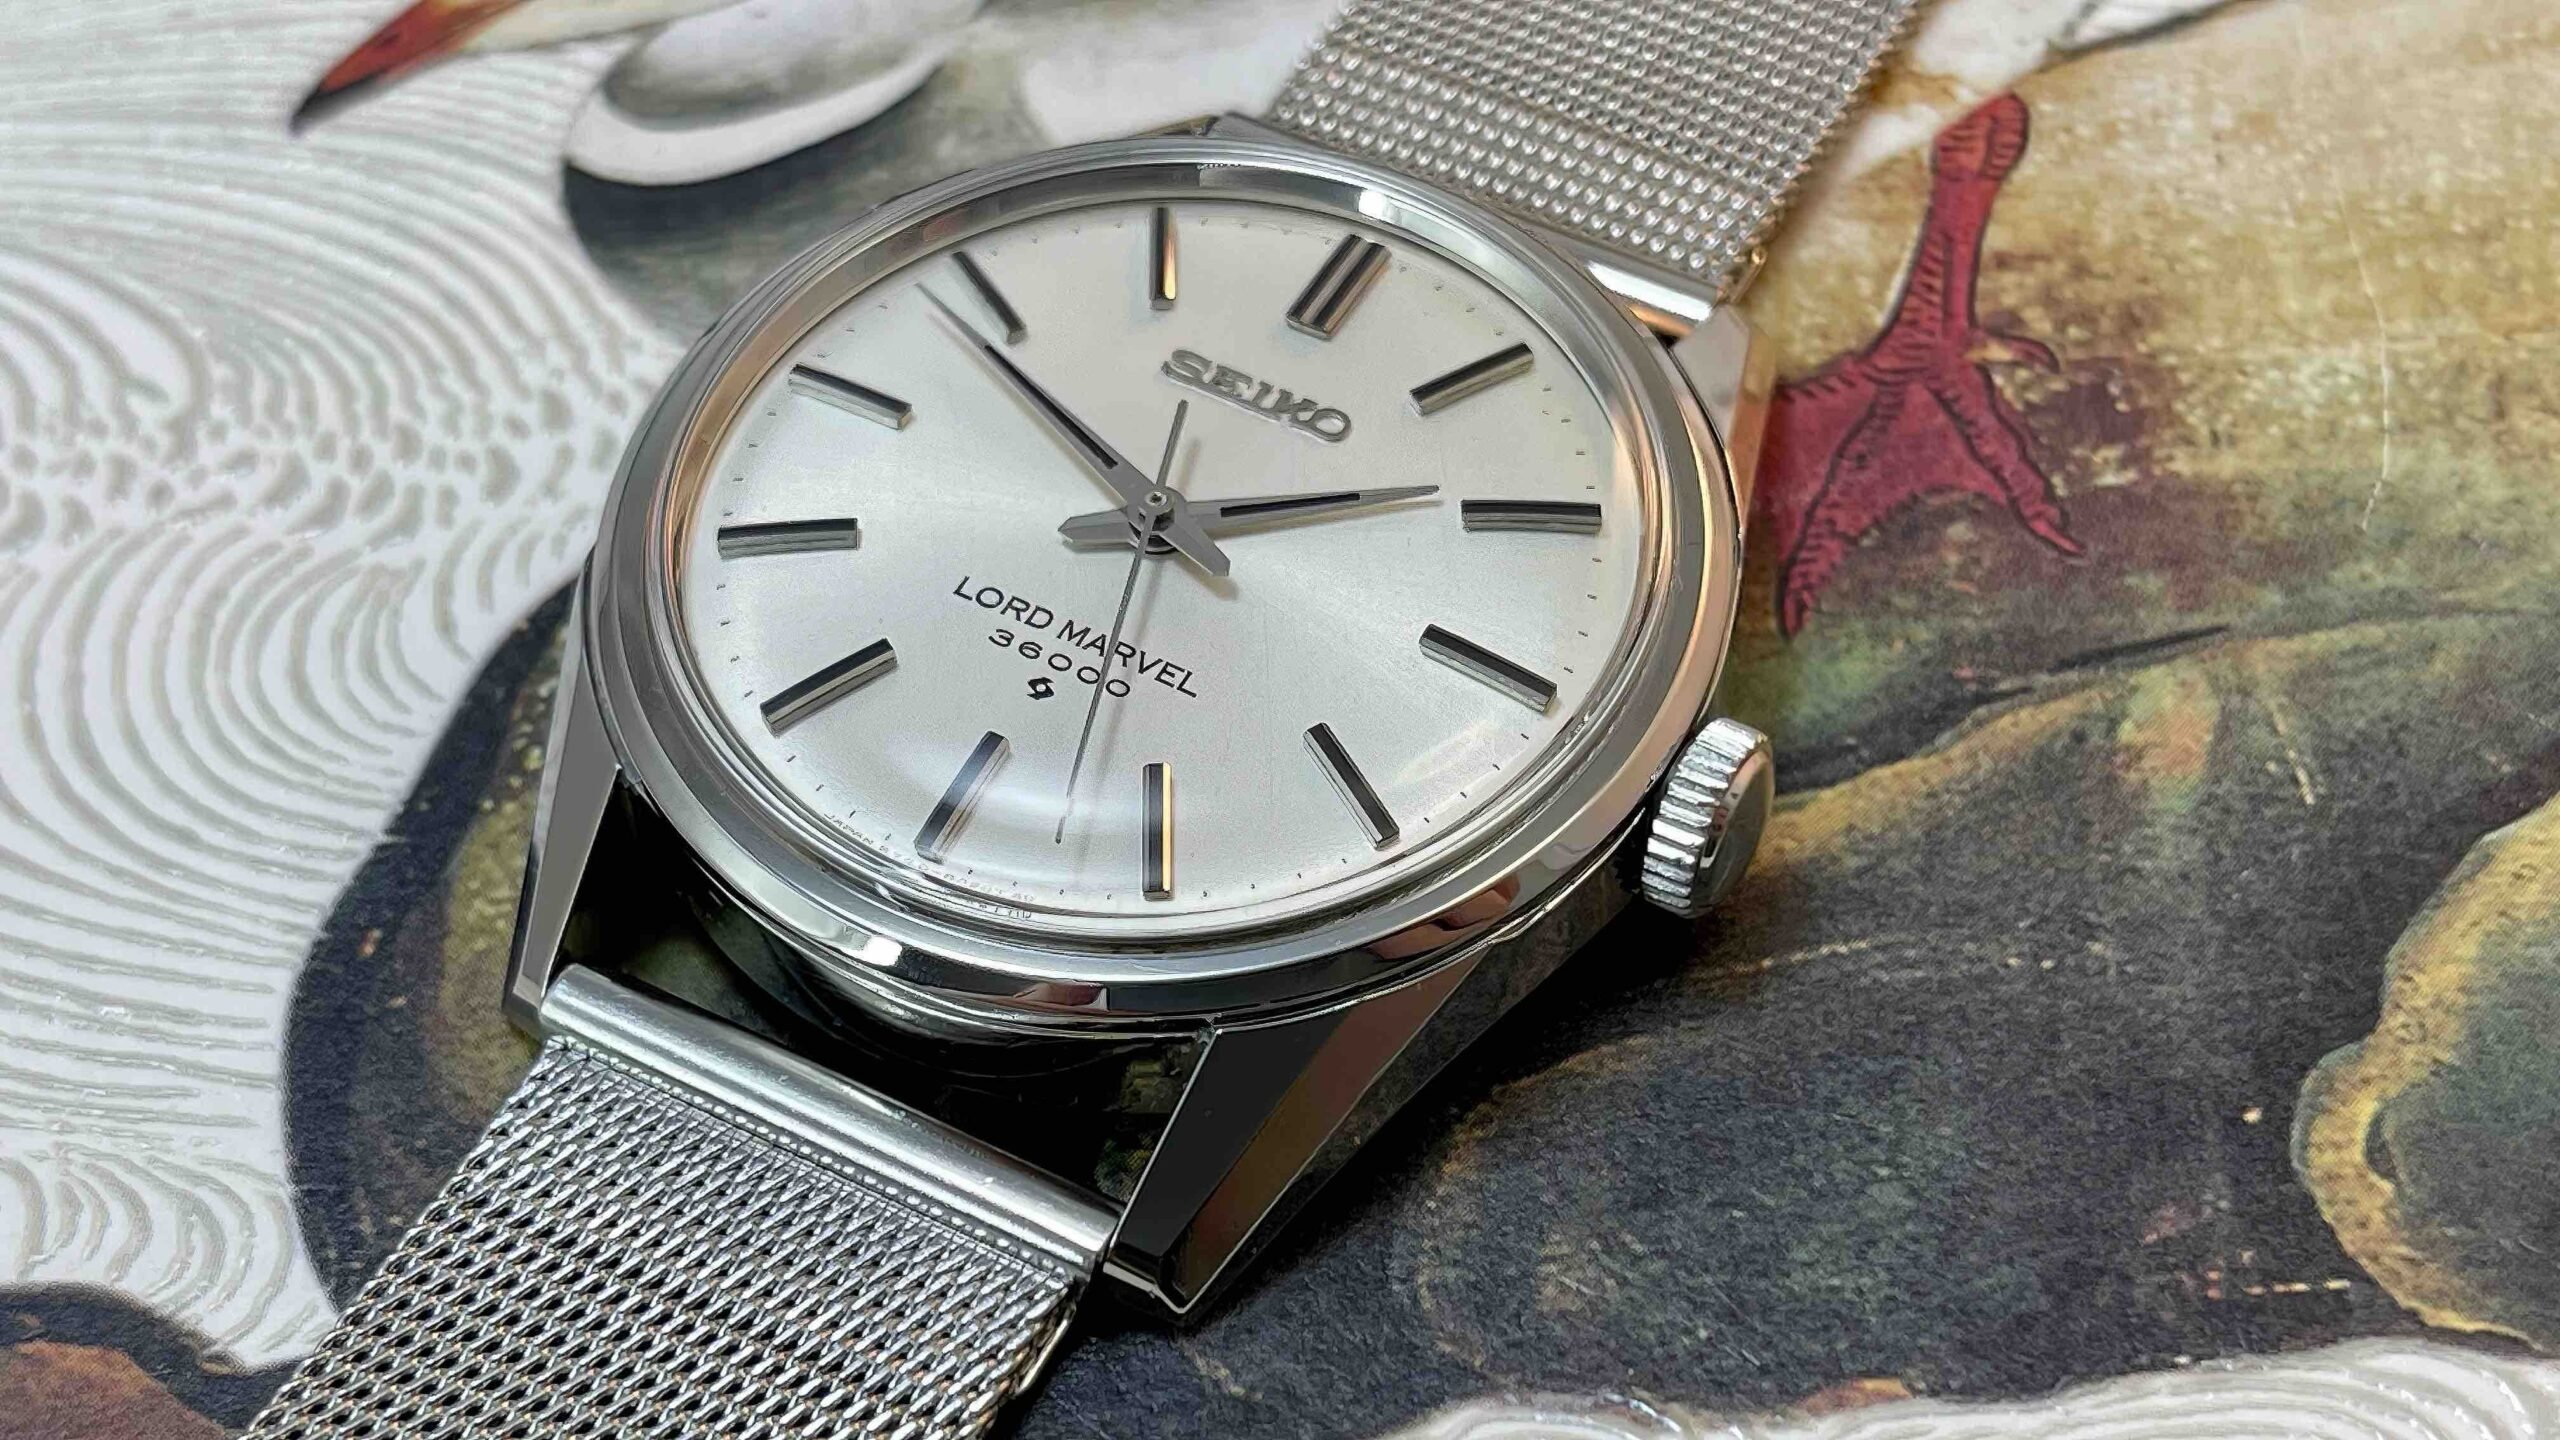 pre-owned Seiko Lord Marvel ref. 5740-8000